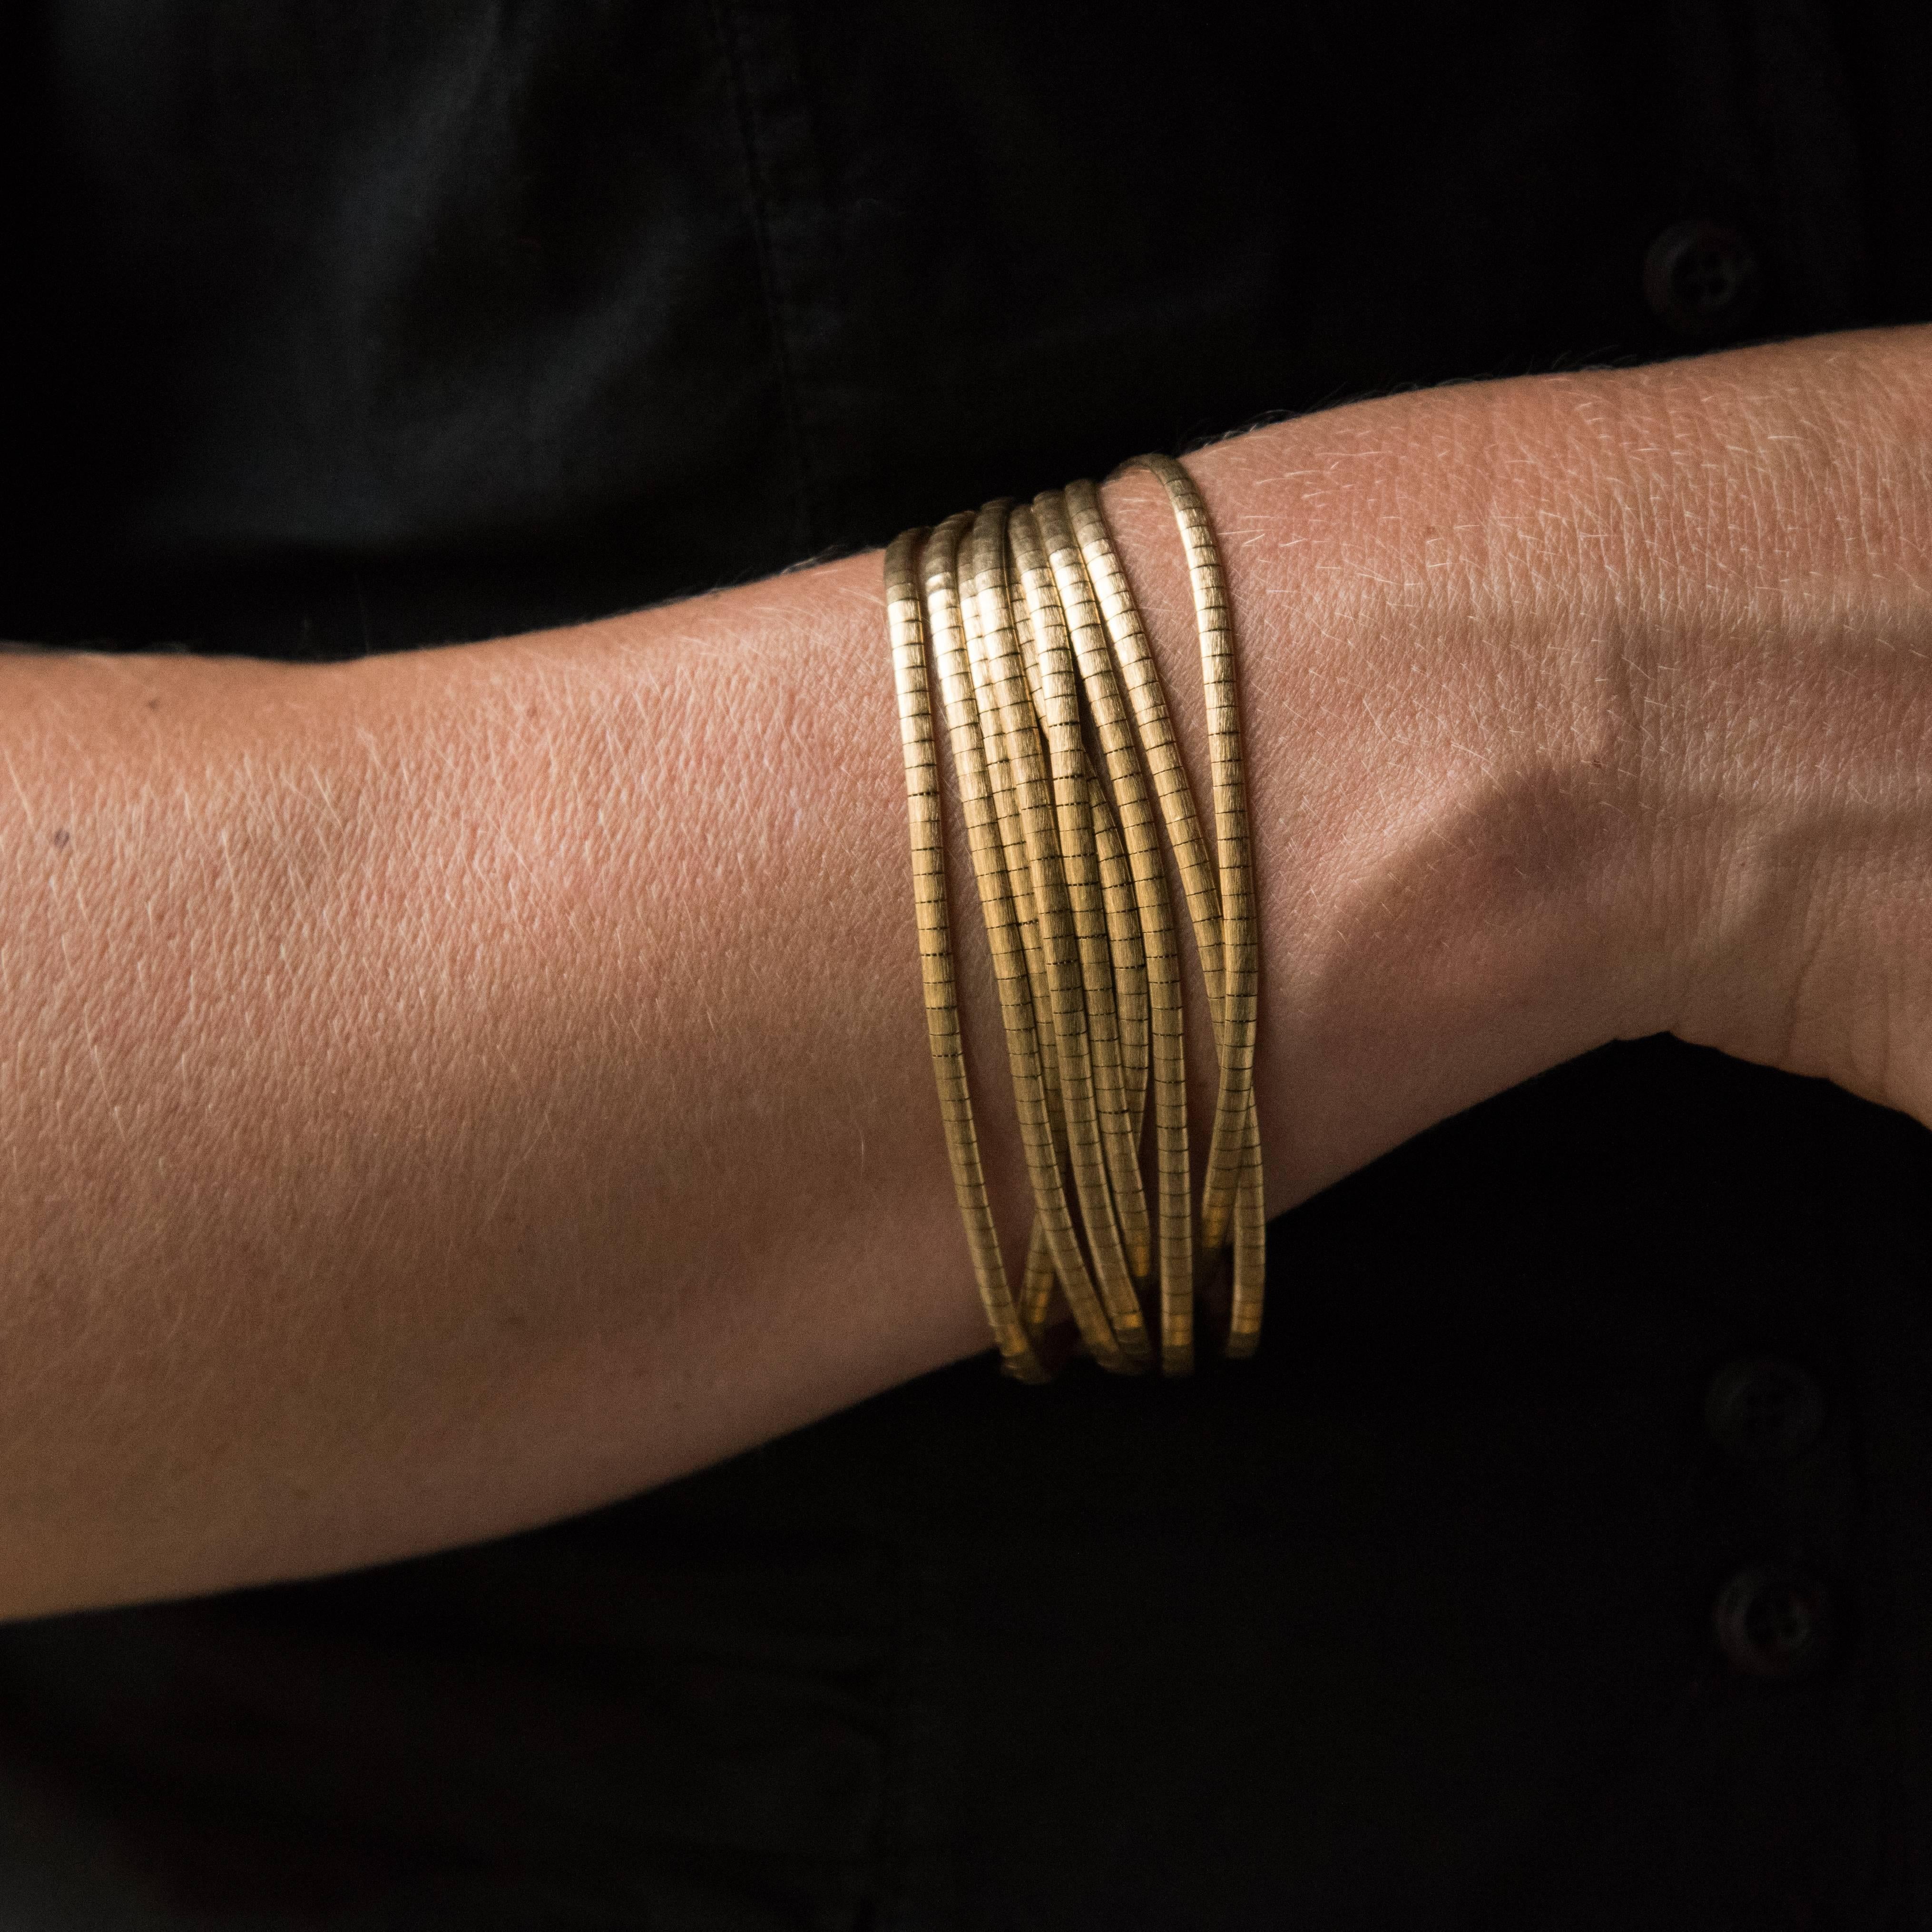 Bracelet in 18 Karats yellow gold.
This vintage bracelet consists of 7 soft satin gold mesh. The clasp is ratchet with 8 security.
Length: 20 cm, width: about 2 cm, thickness: 3.9 cm.
Total weight of the jewel: 54.3 g approximately.
Authentic